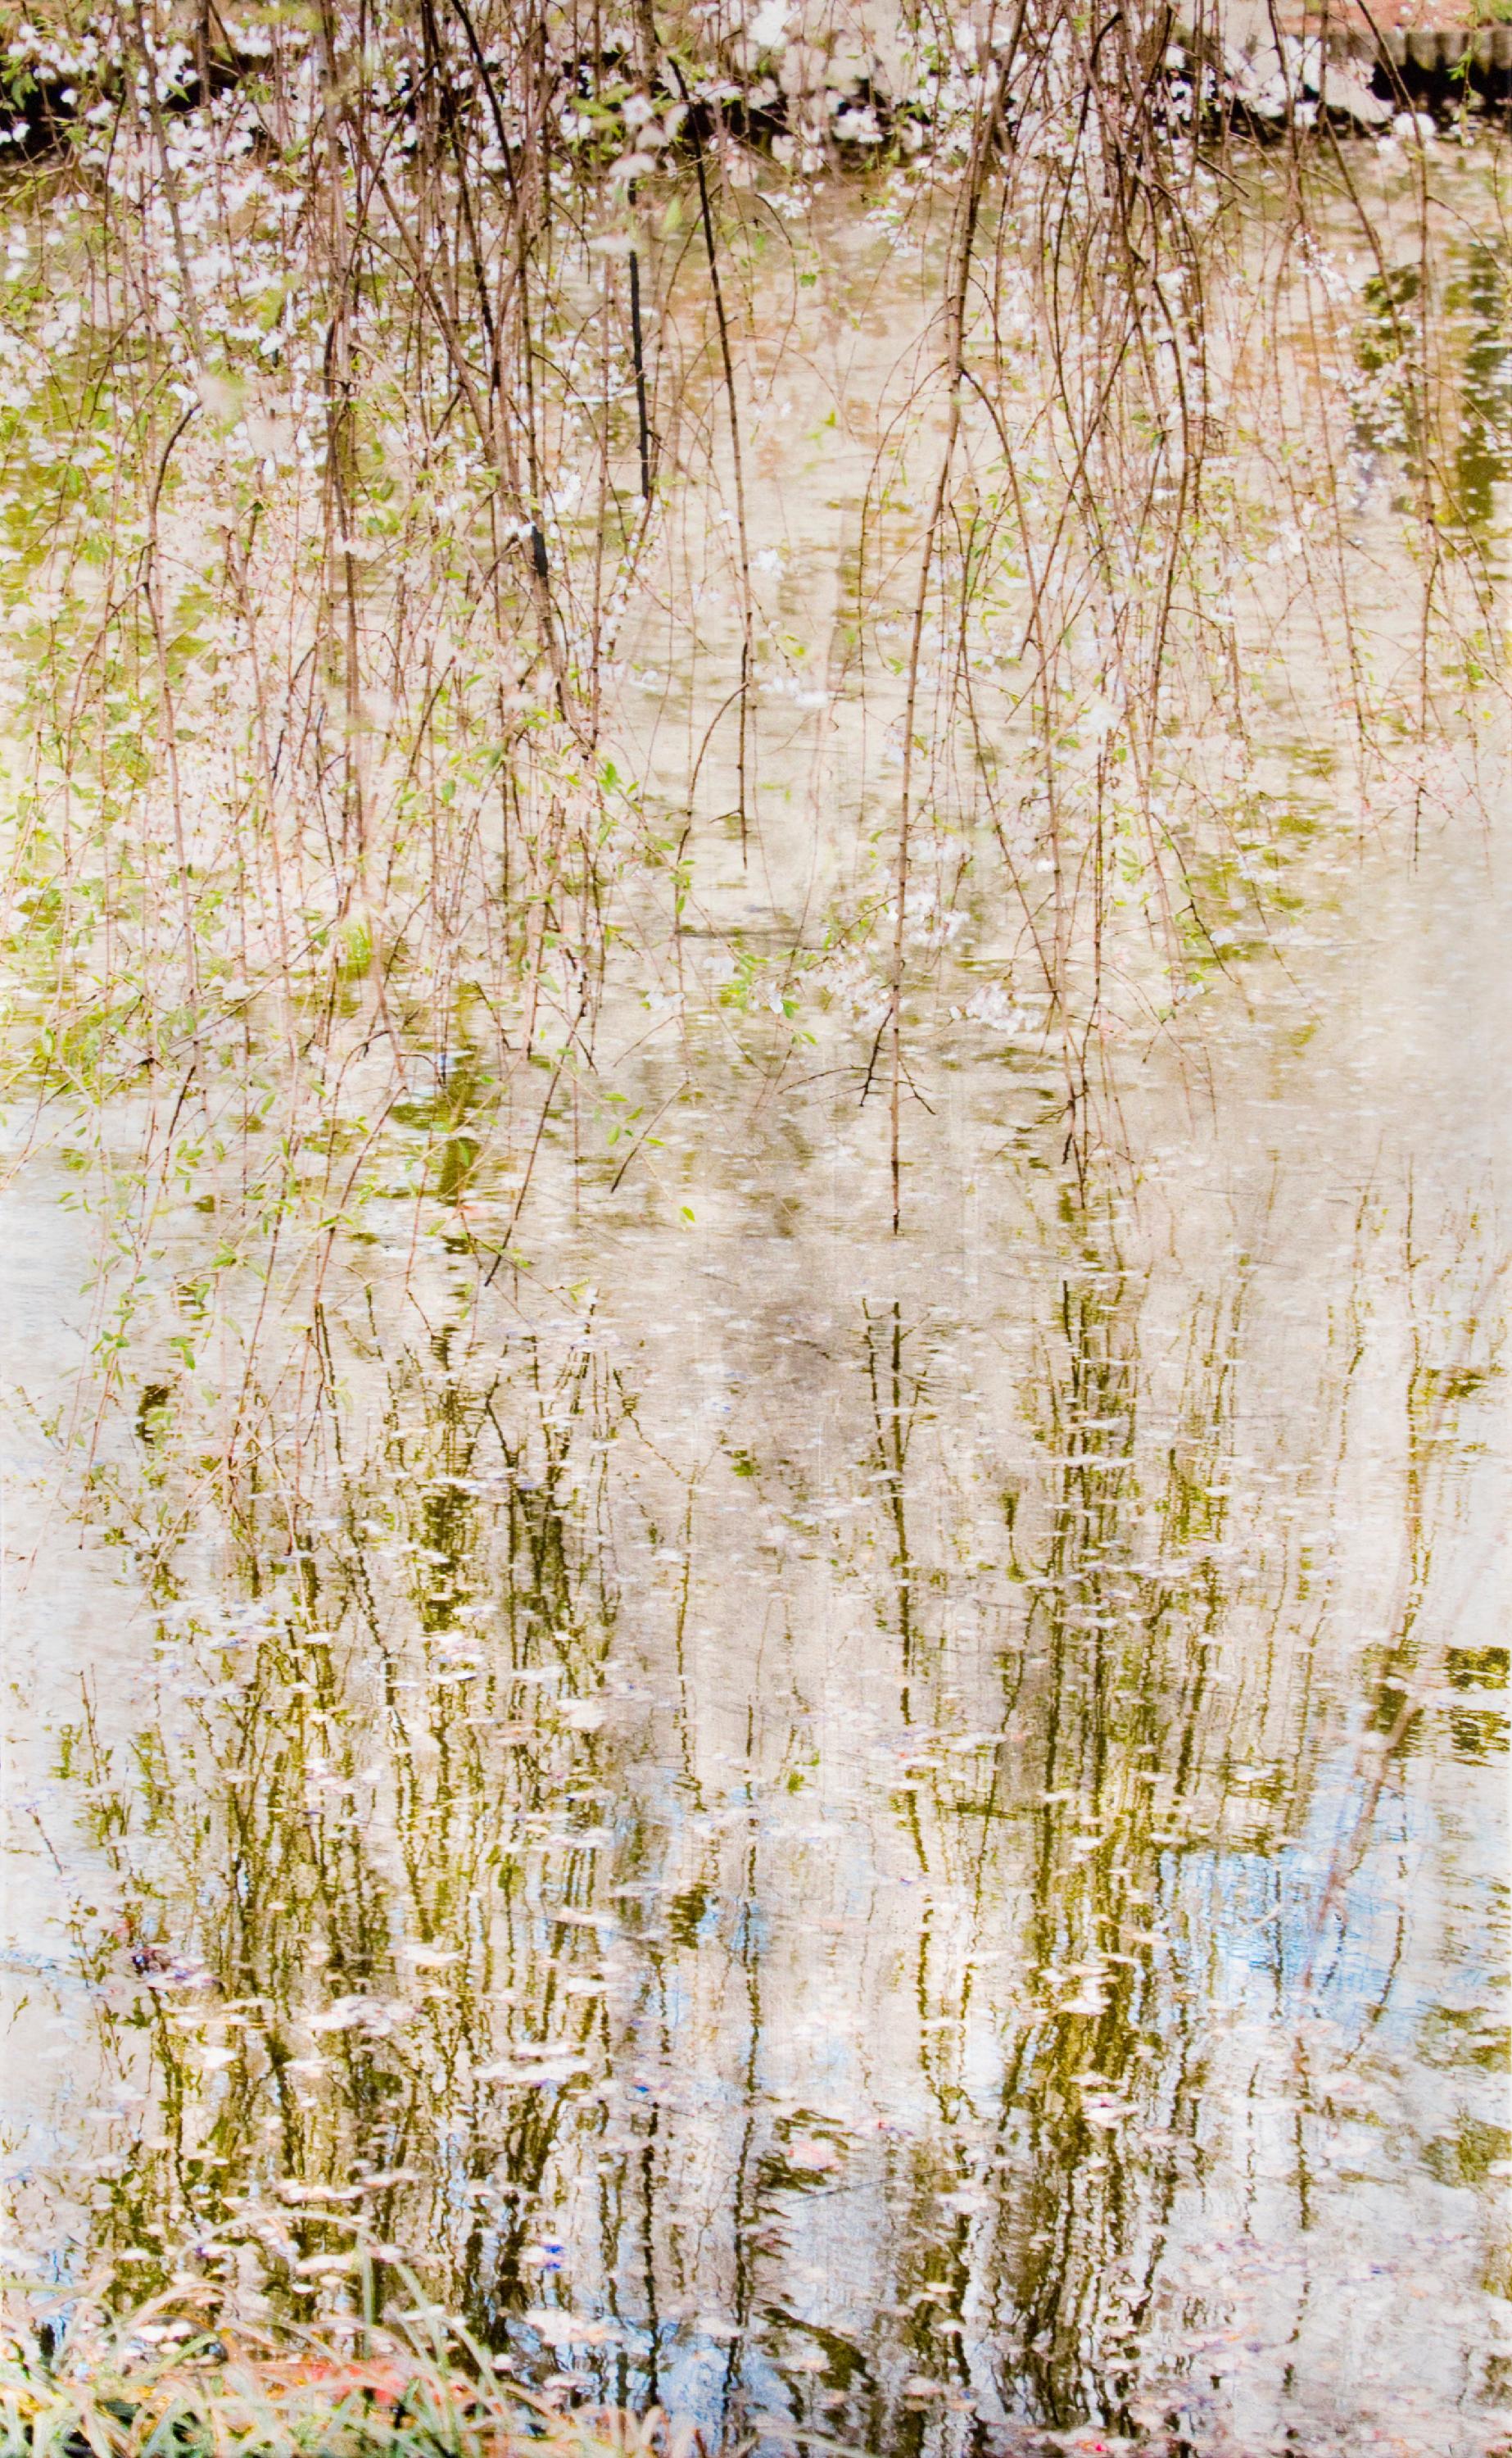 CALM WHISPERS - STATE 2 -  Waterscape / Reflections / Contemporary Art - Photograph by Susan Goldsmith